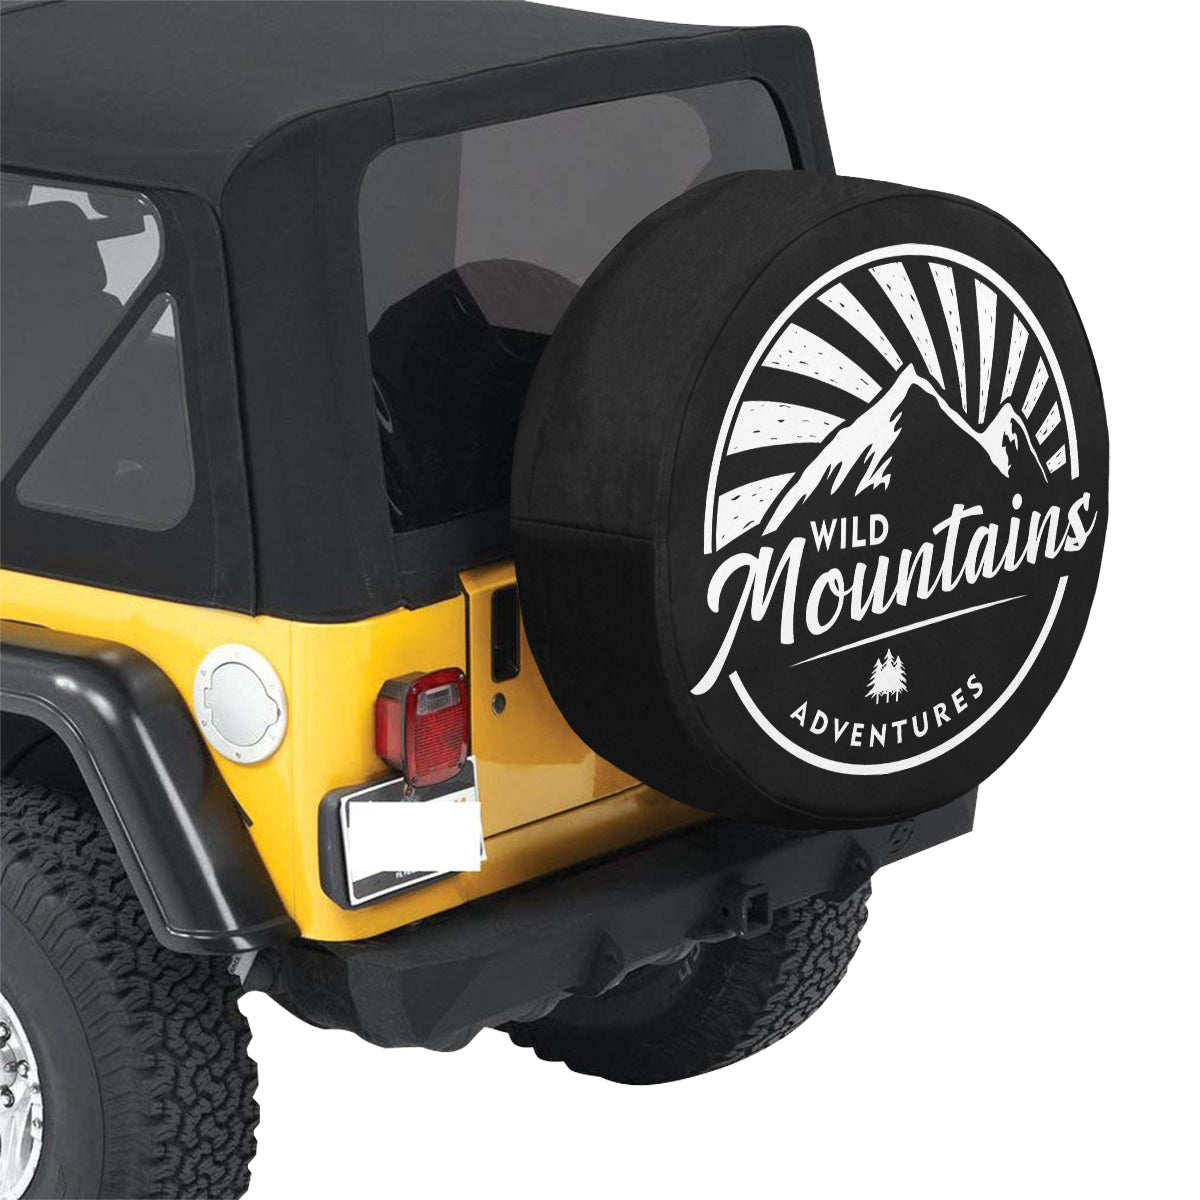 g49453 Wild mountain adventures Spare Tire Cover(Large)(17") - Starcove Design